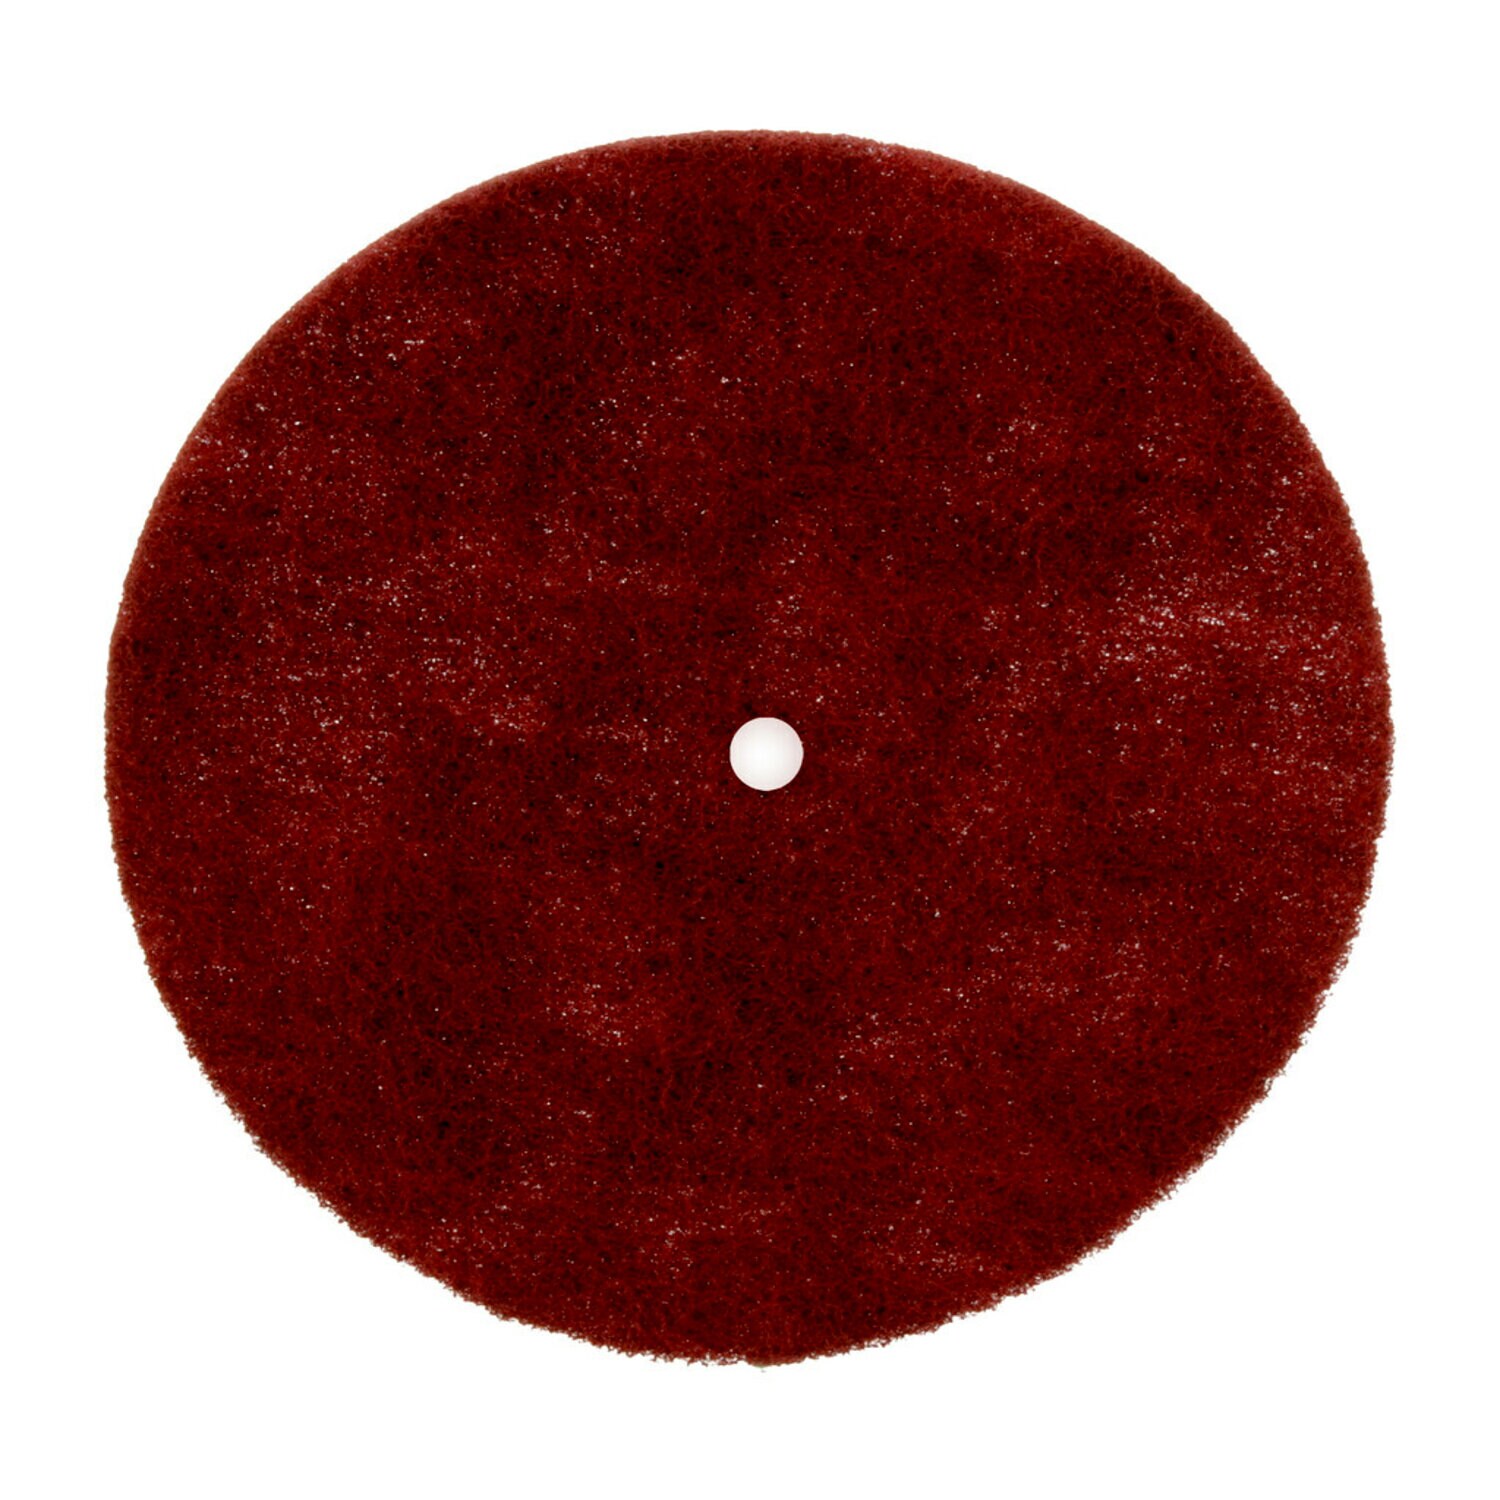 7000122066 - Standard Abrasives Buff and Blend HS Disc, 860608, 5 in x 1/2 in A VFN,
10/Pac, 100 ea/Case